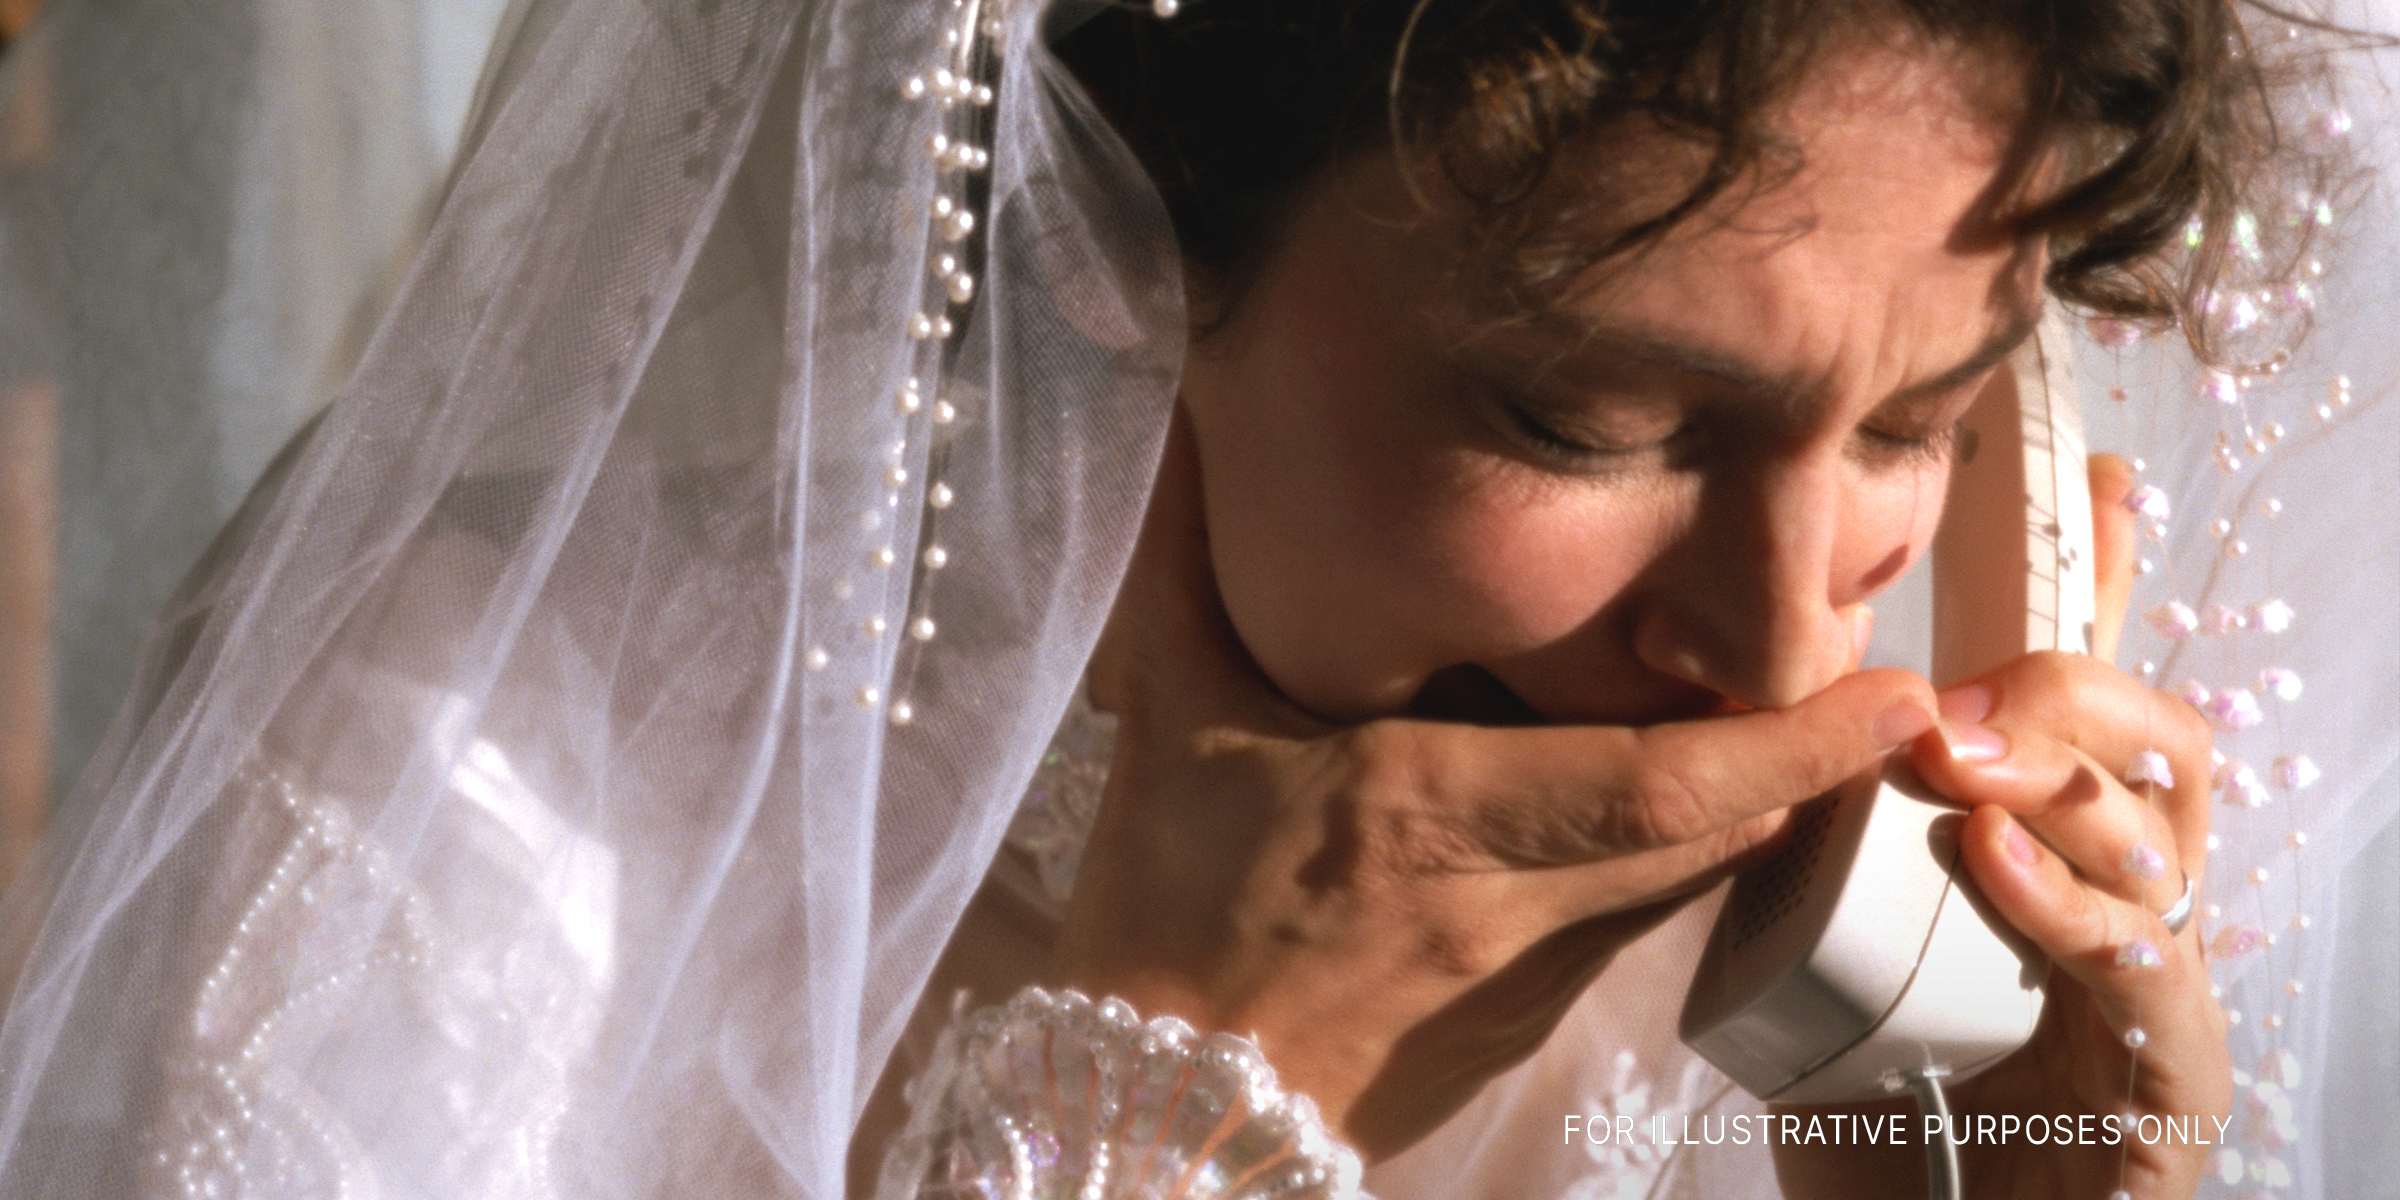 A bride crying while talking on the phone | Source: Getty Image